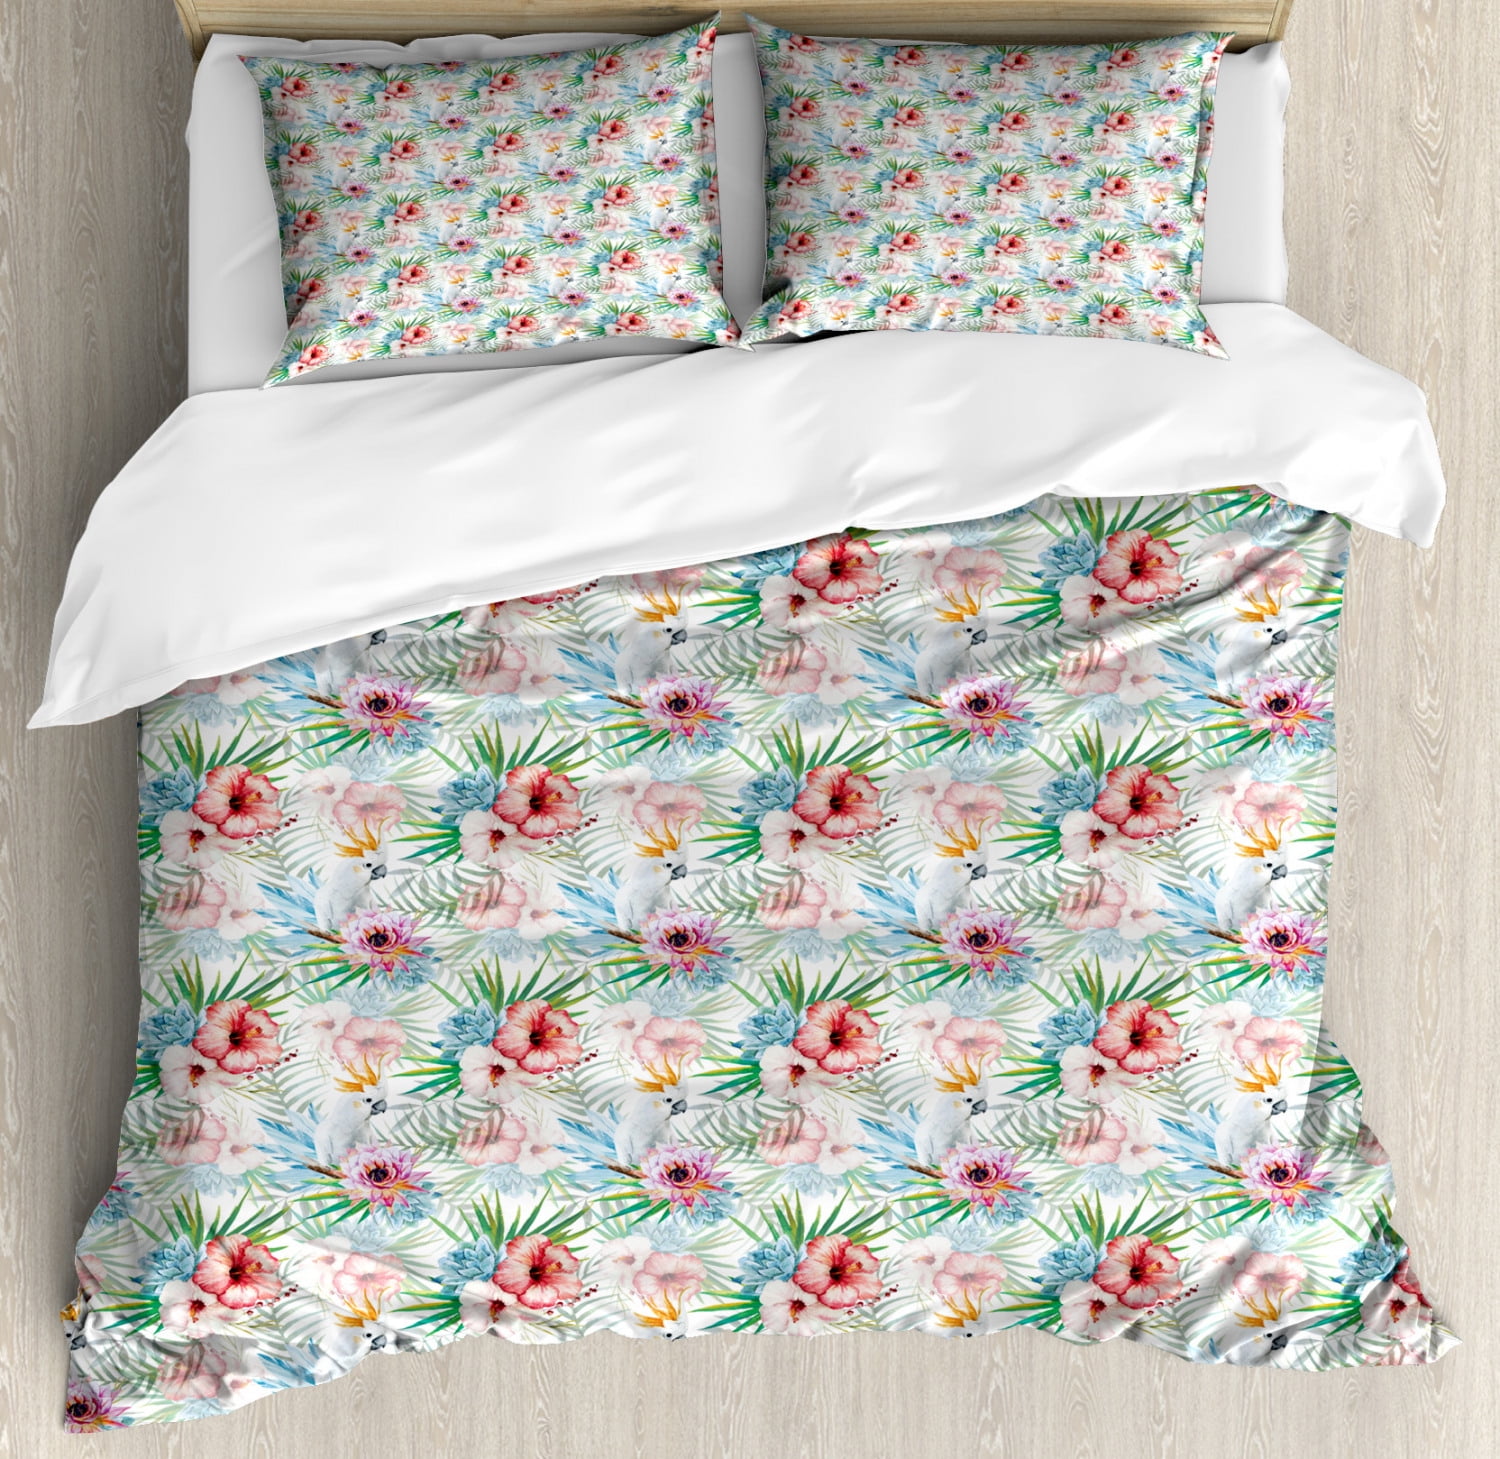 Tropical Duvet Cover Set King Size, Exotic Hibiscuses and Parrots in ...